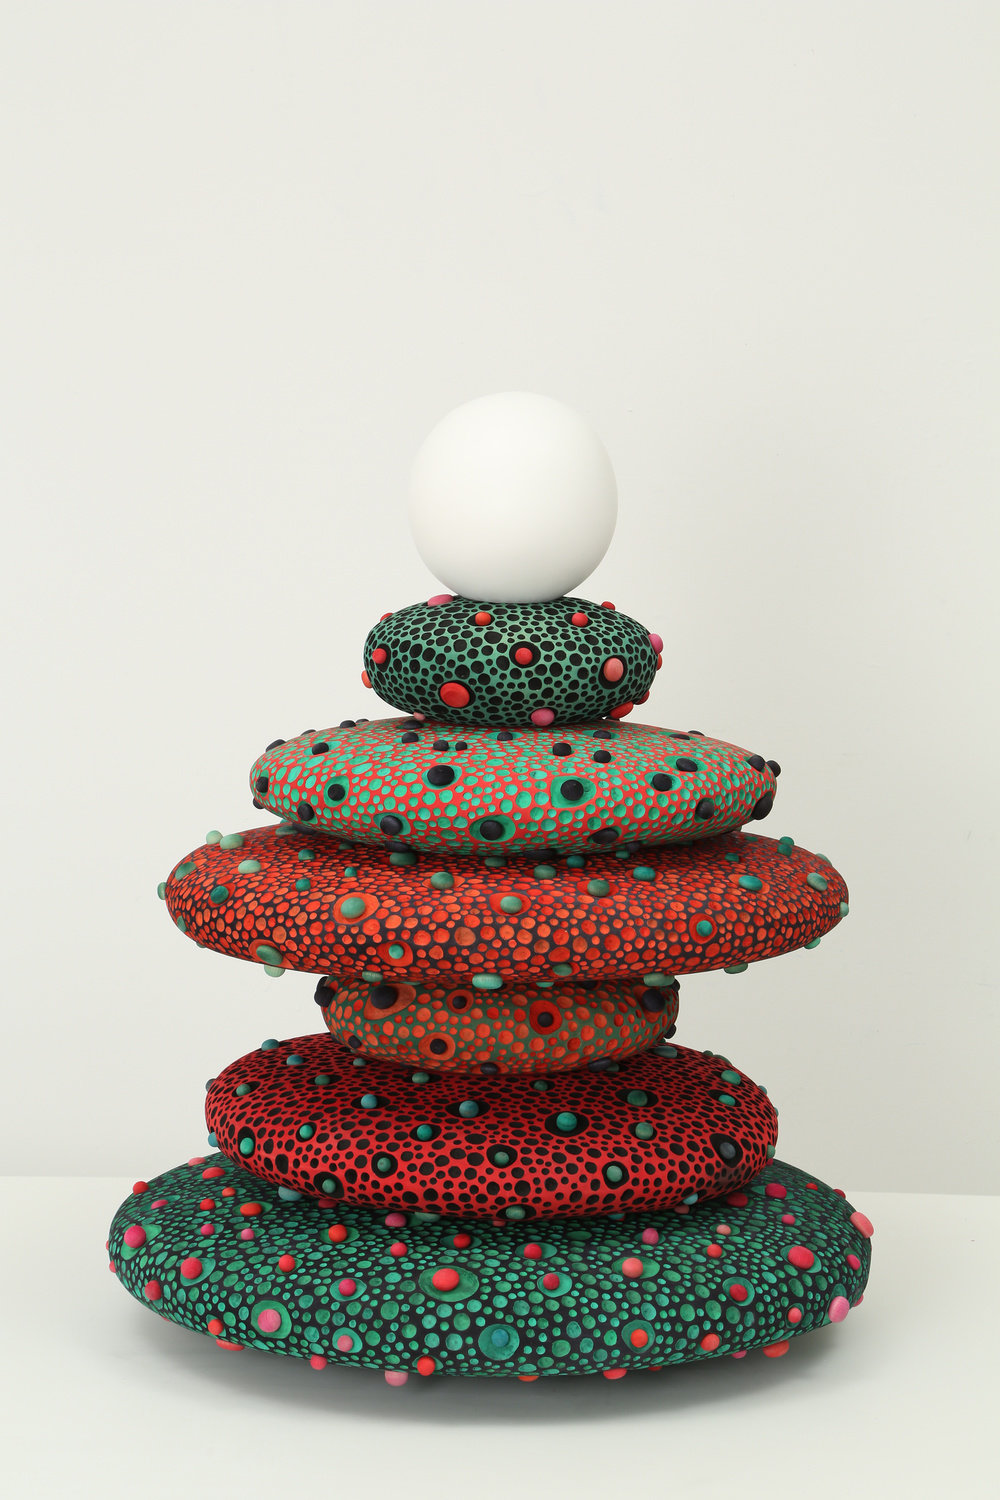 Ronay, stacked ellipsoid cairn with pearl, 2015, basswood, dye, gouache, shellac based primer, 28.5 x 23 x 23 in. 72.39 x 58.42 x 58.42 cm cnon 56.394